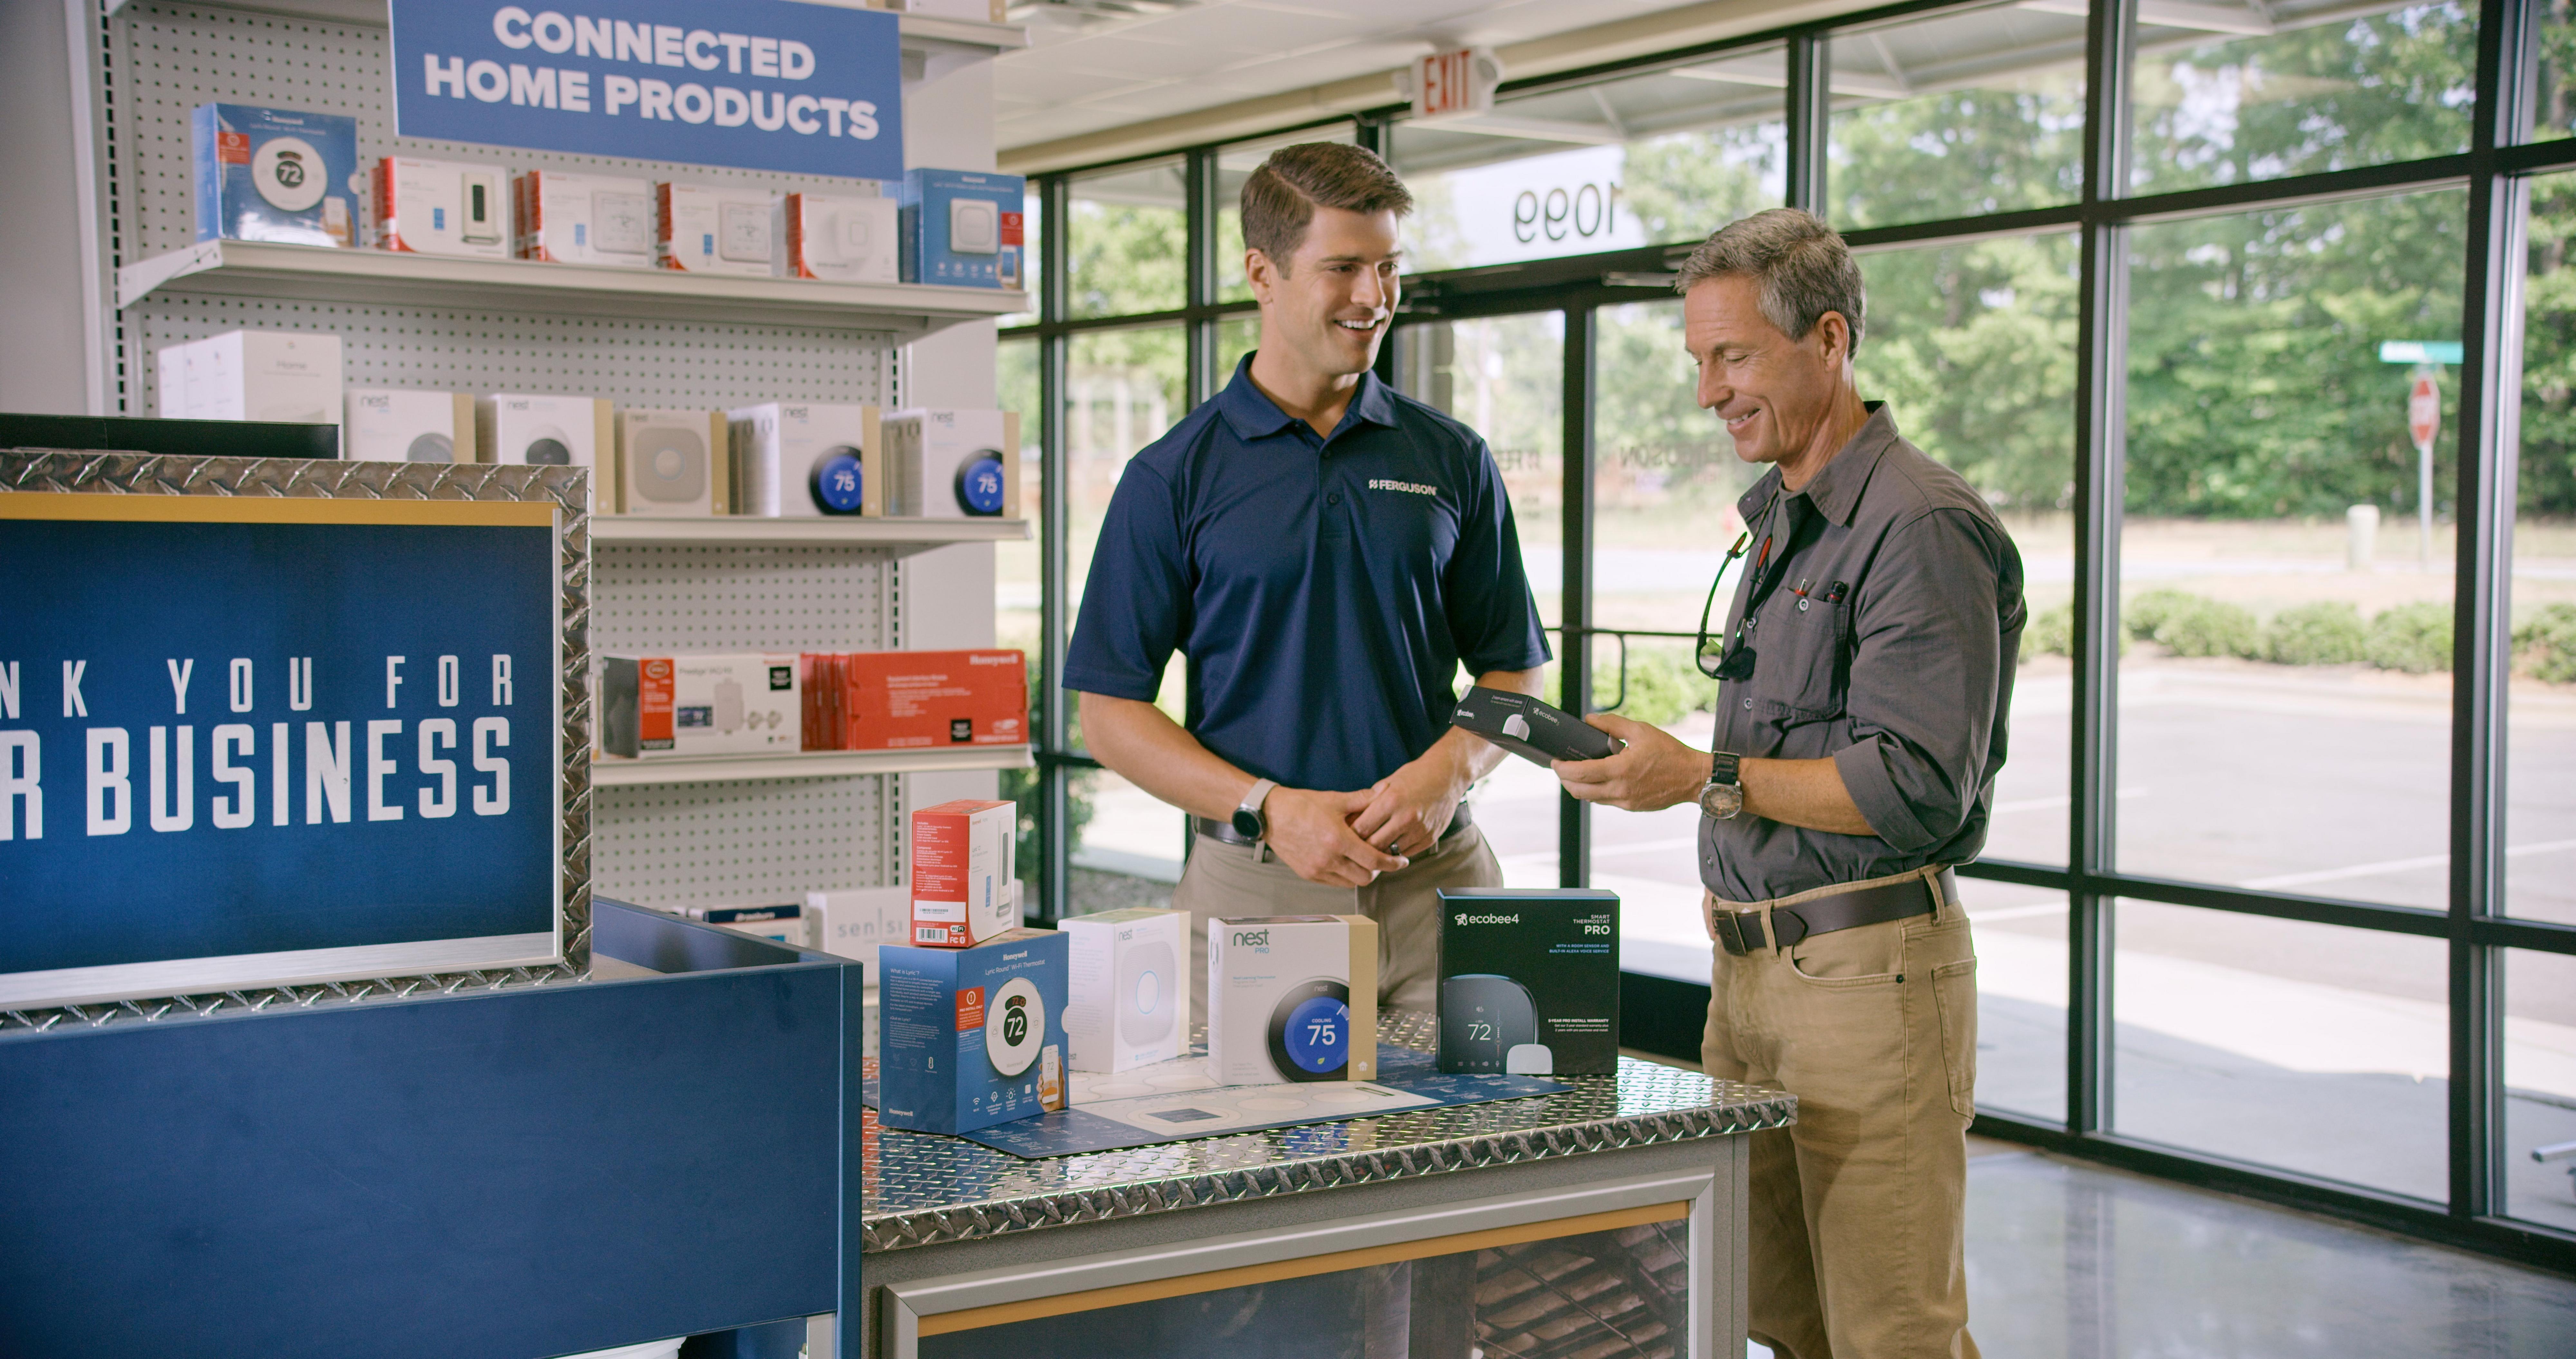 At a Ferguson Counter location, an associate discusses connected home products with a contractor.